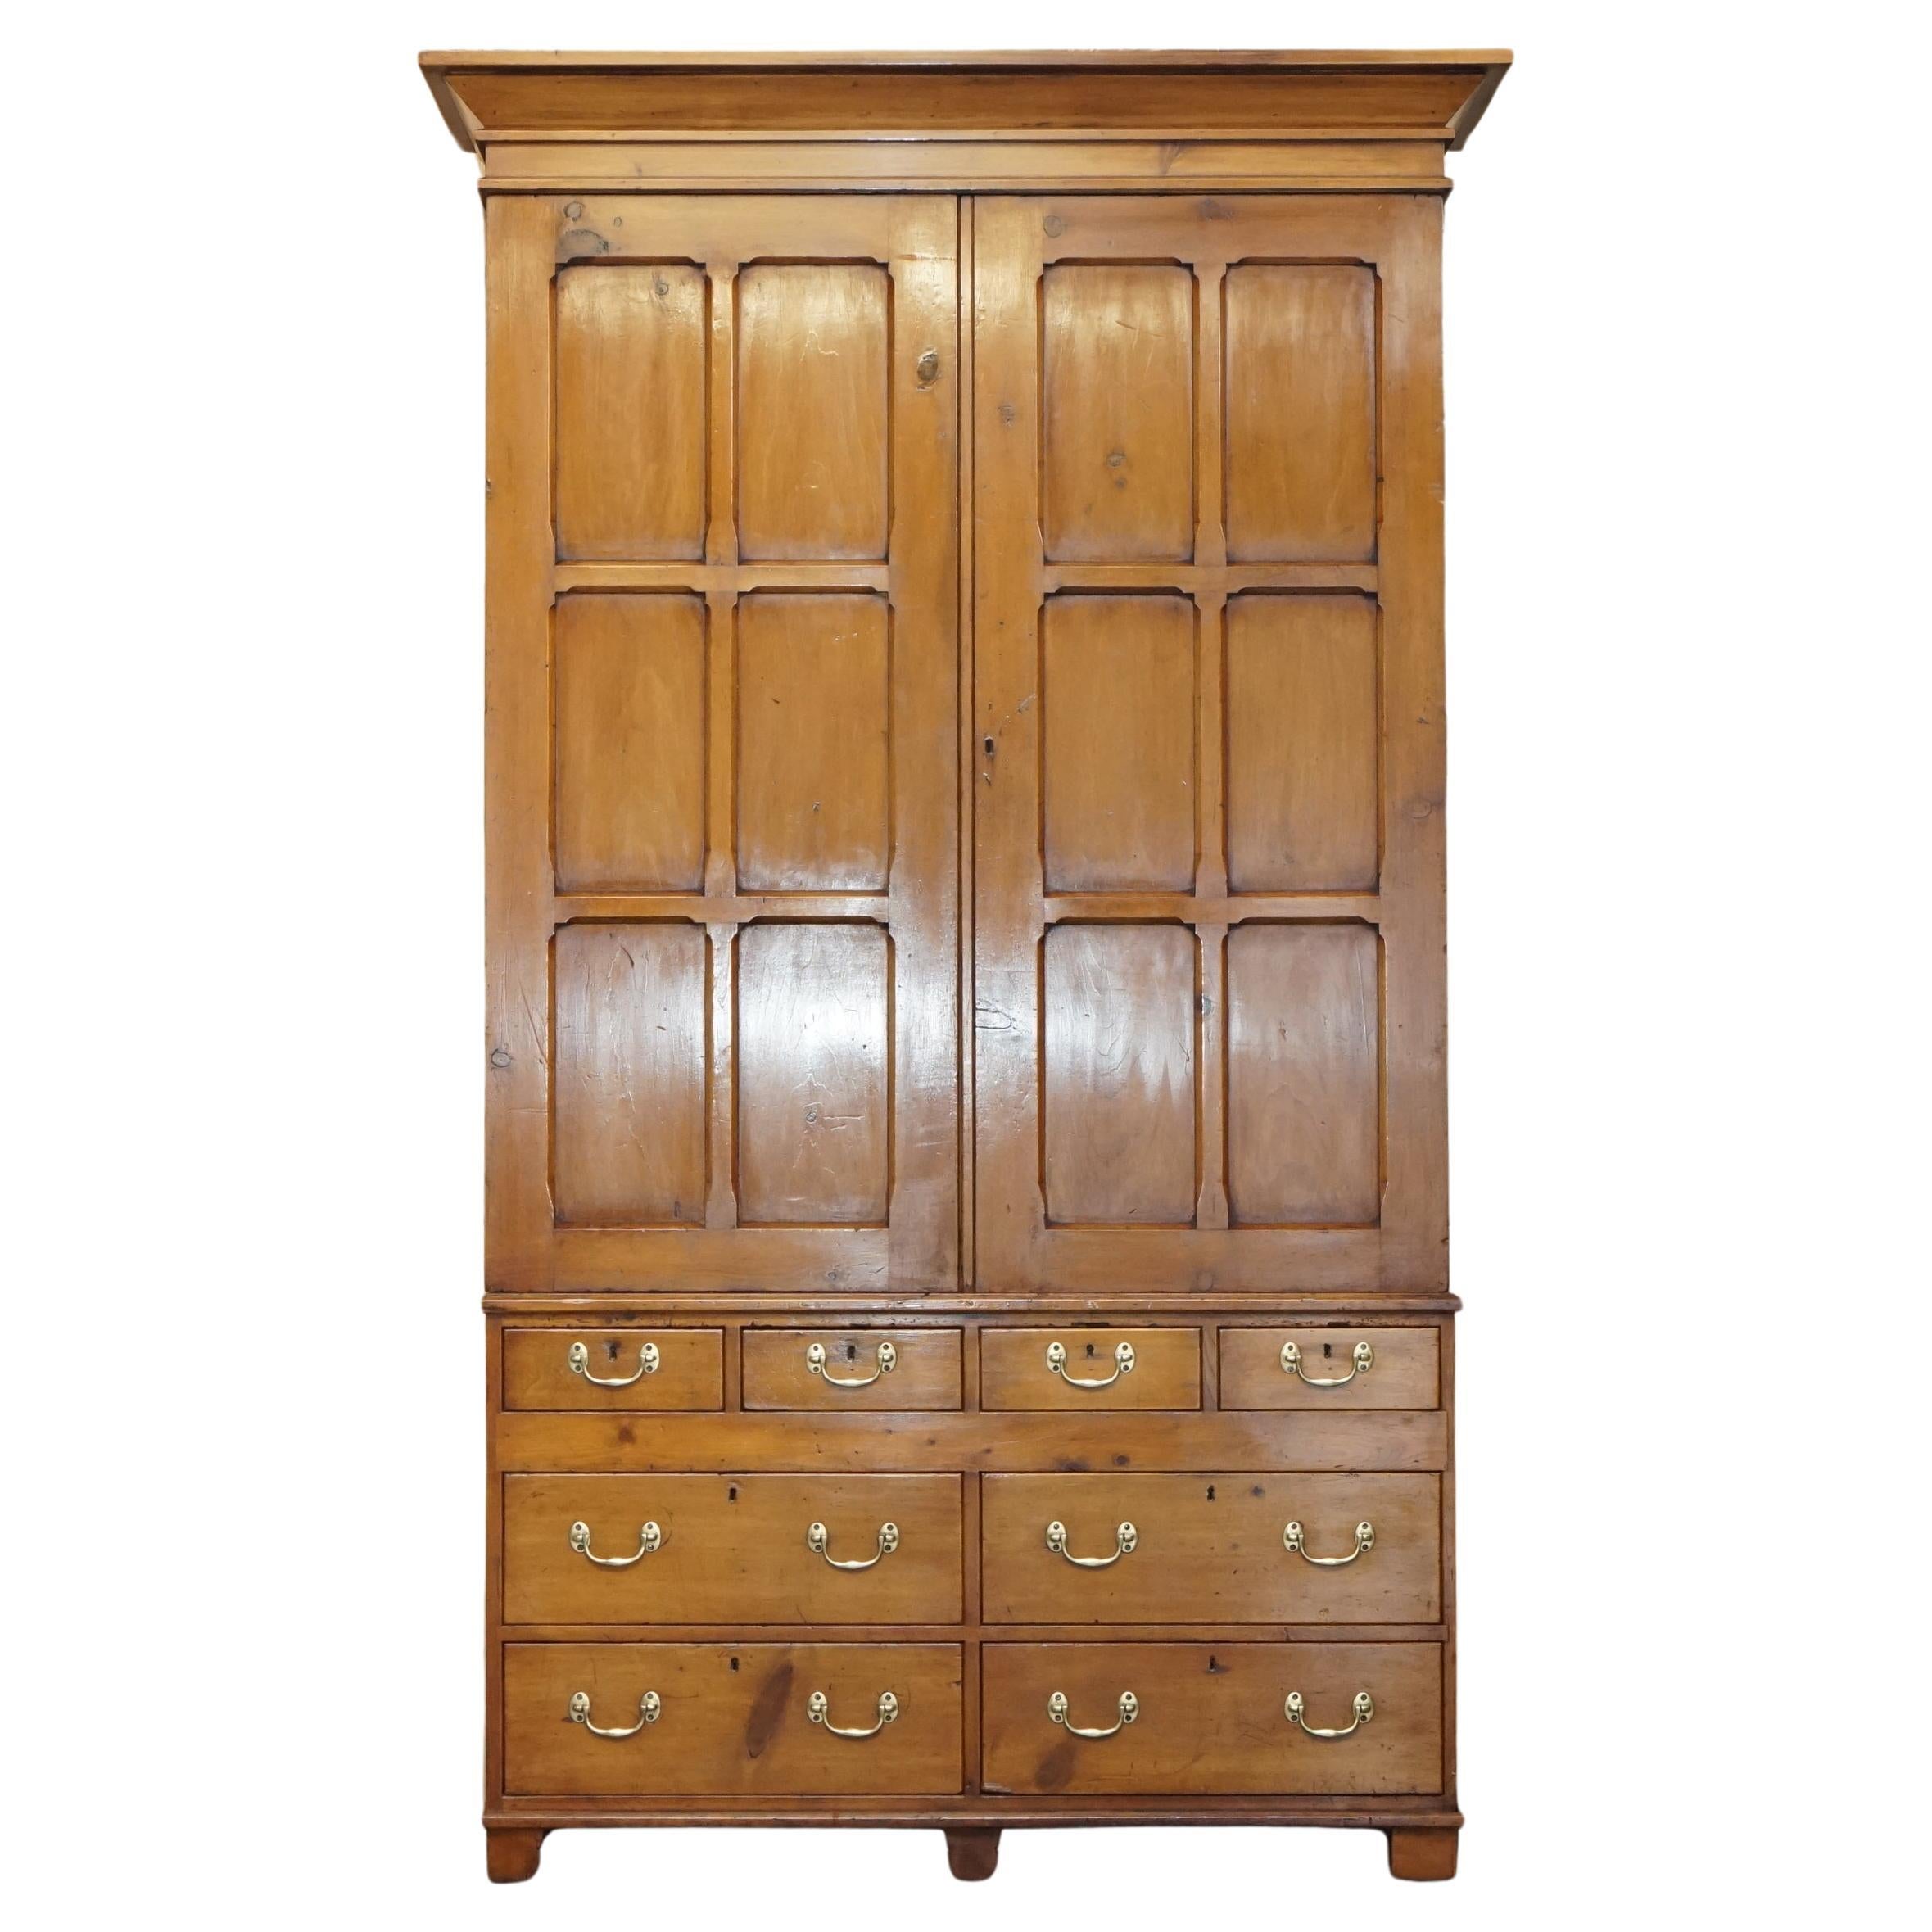 SUPER RARE FULLY RESTORED ANTiQUE VICTORIAN FRUITWOOD GUN COLLECTORS CABINET For Sale